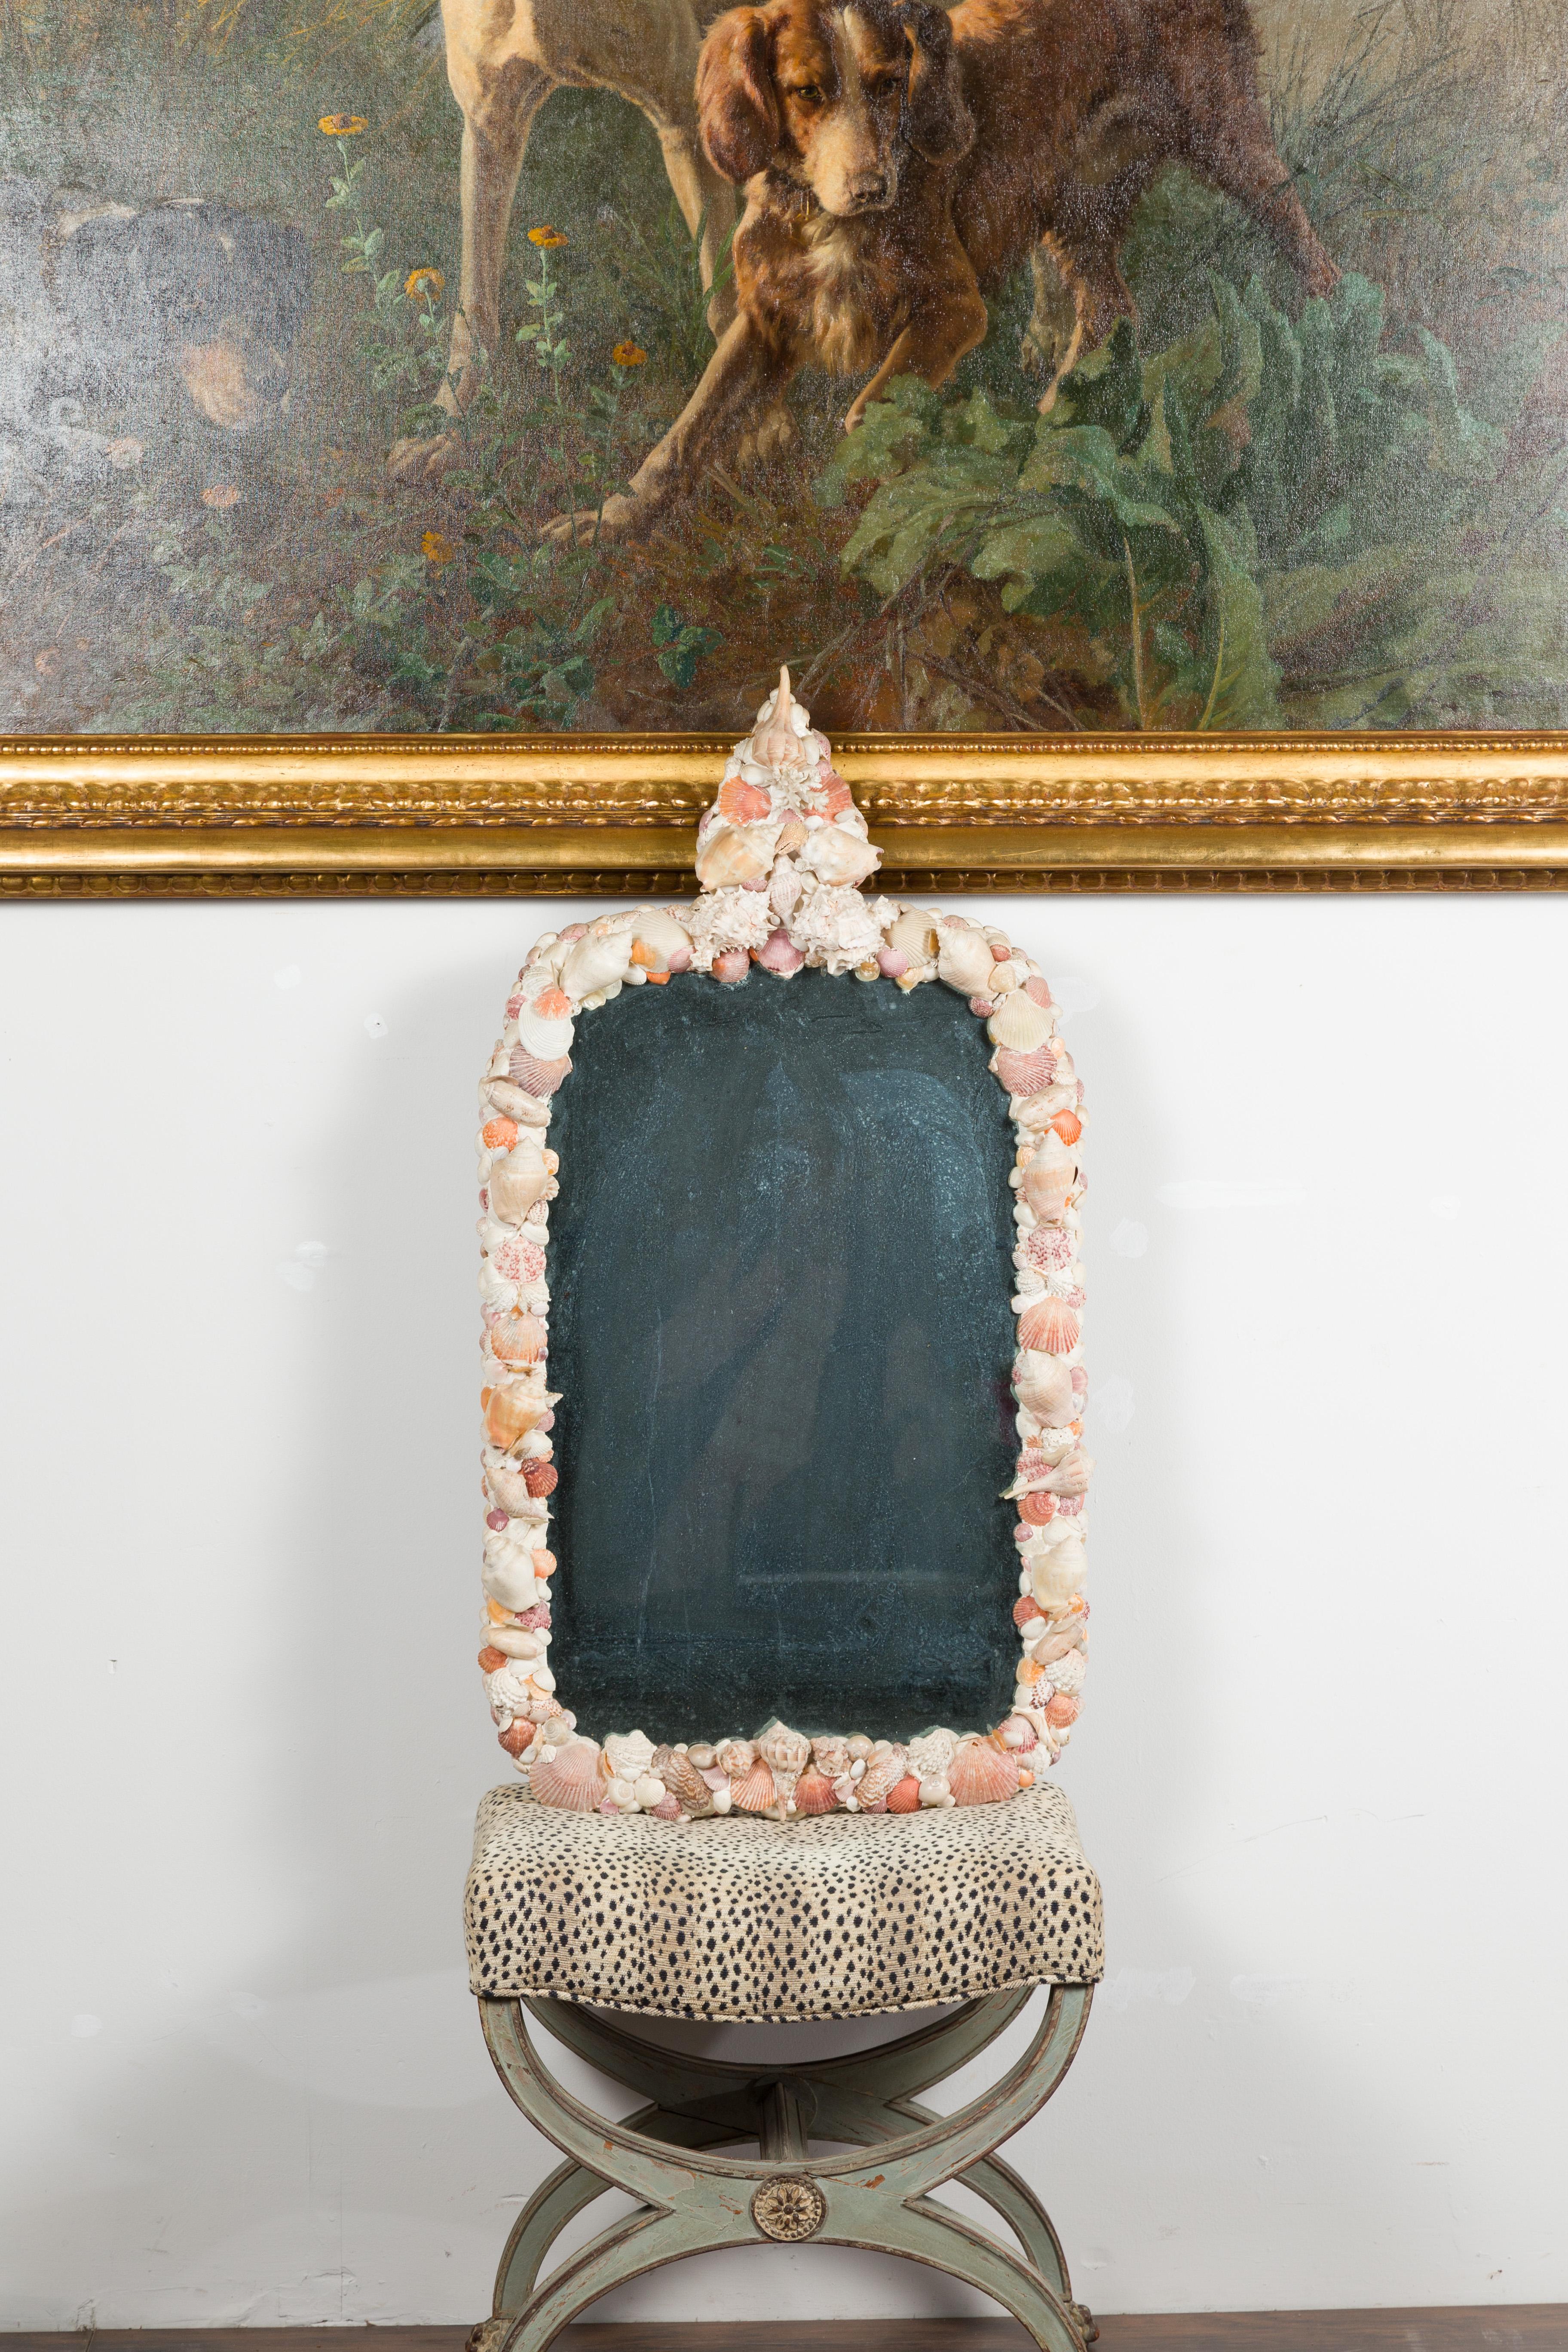 20th Century American 1930s Shell Mirror with Pyramidal Crest and Pastel Tones For Sale